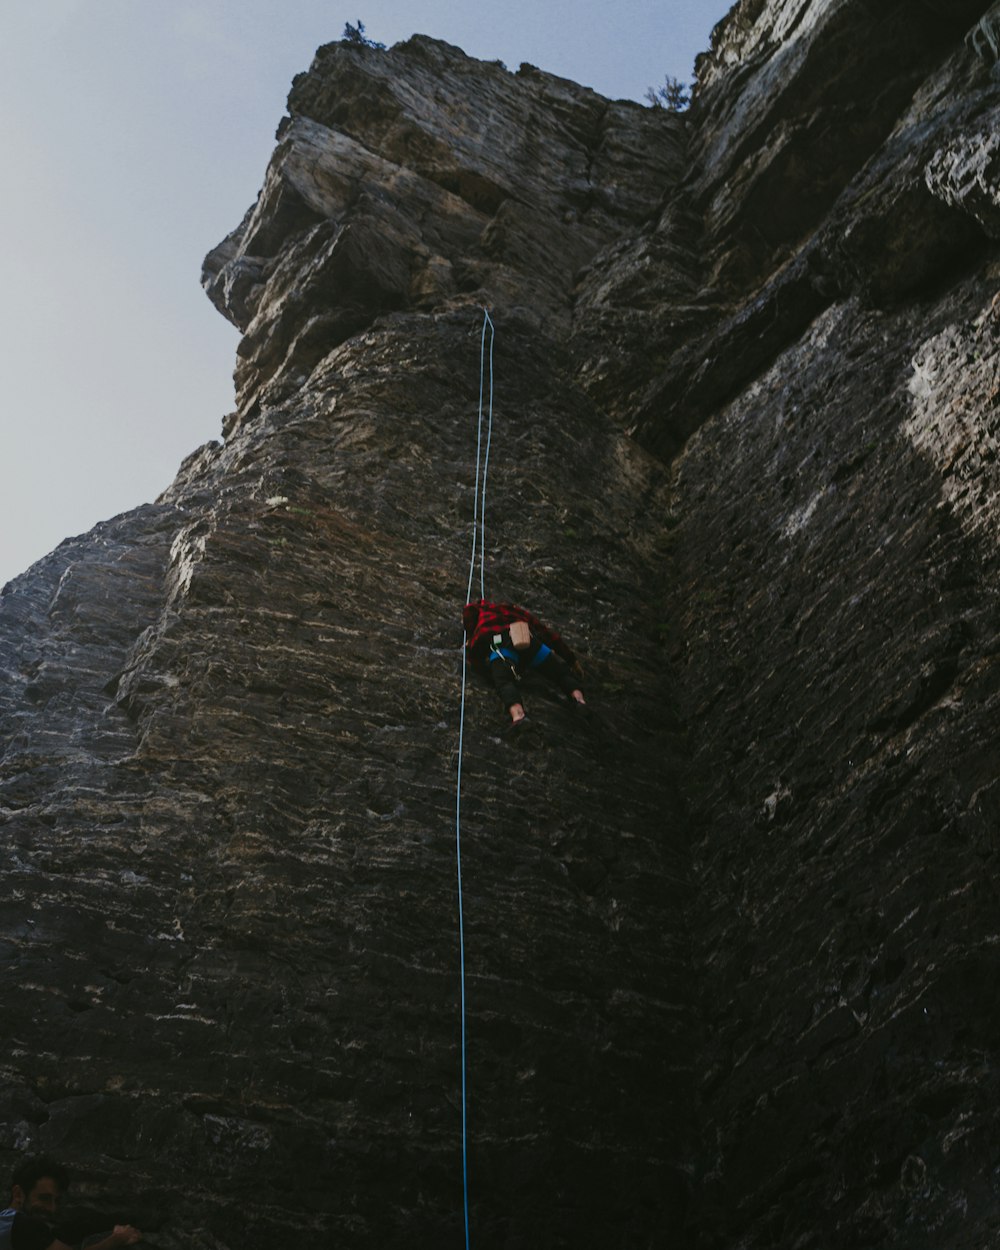 person in red jacket climbing mountain during daytime